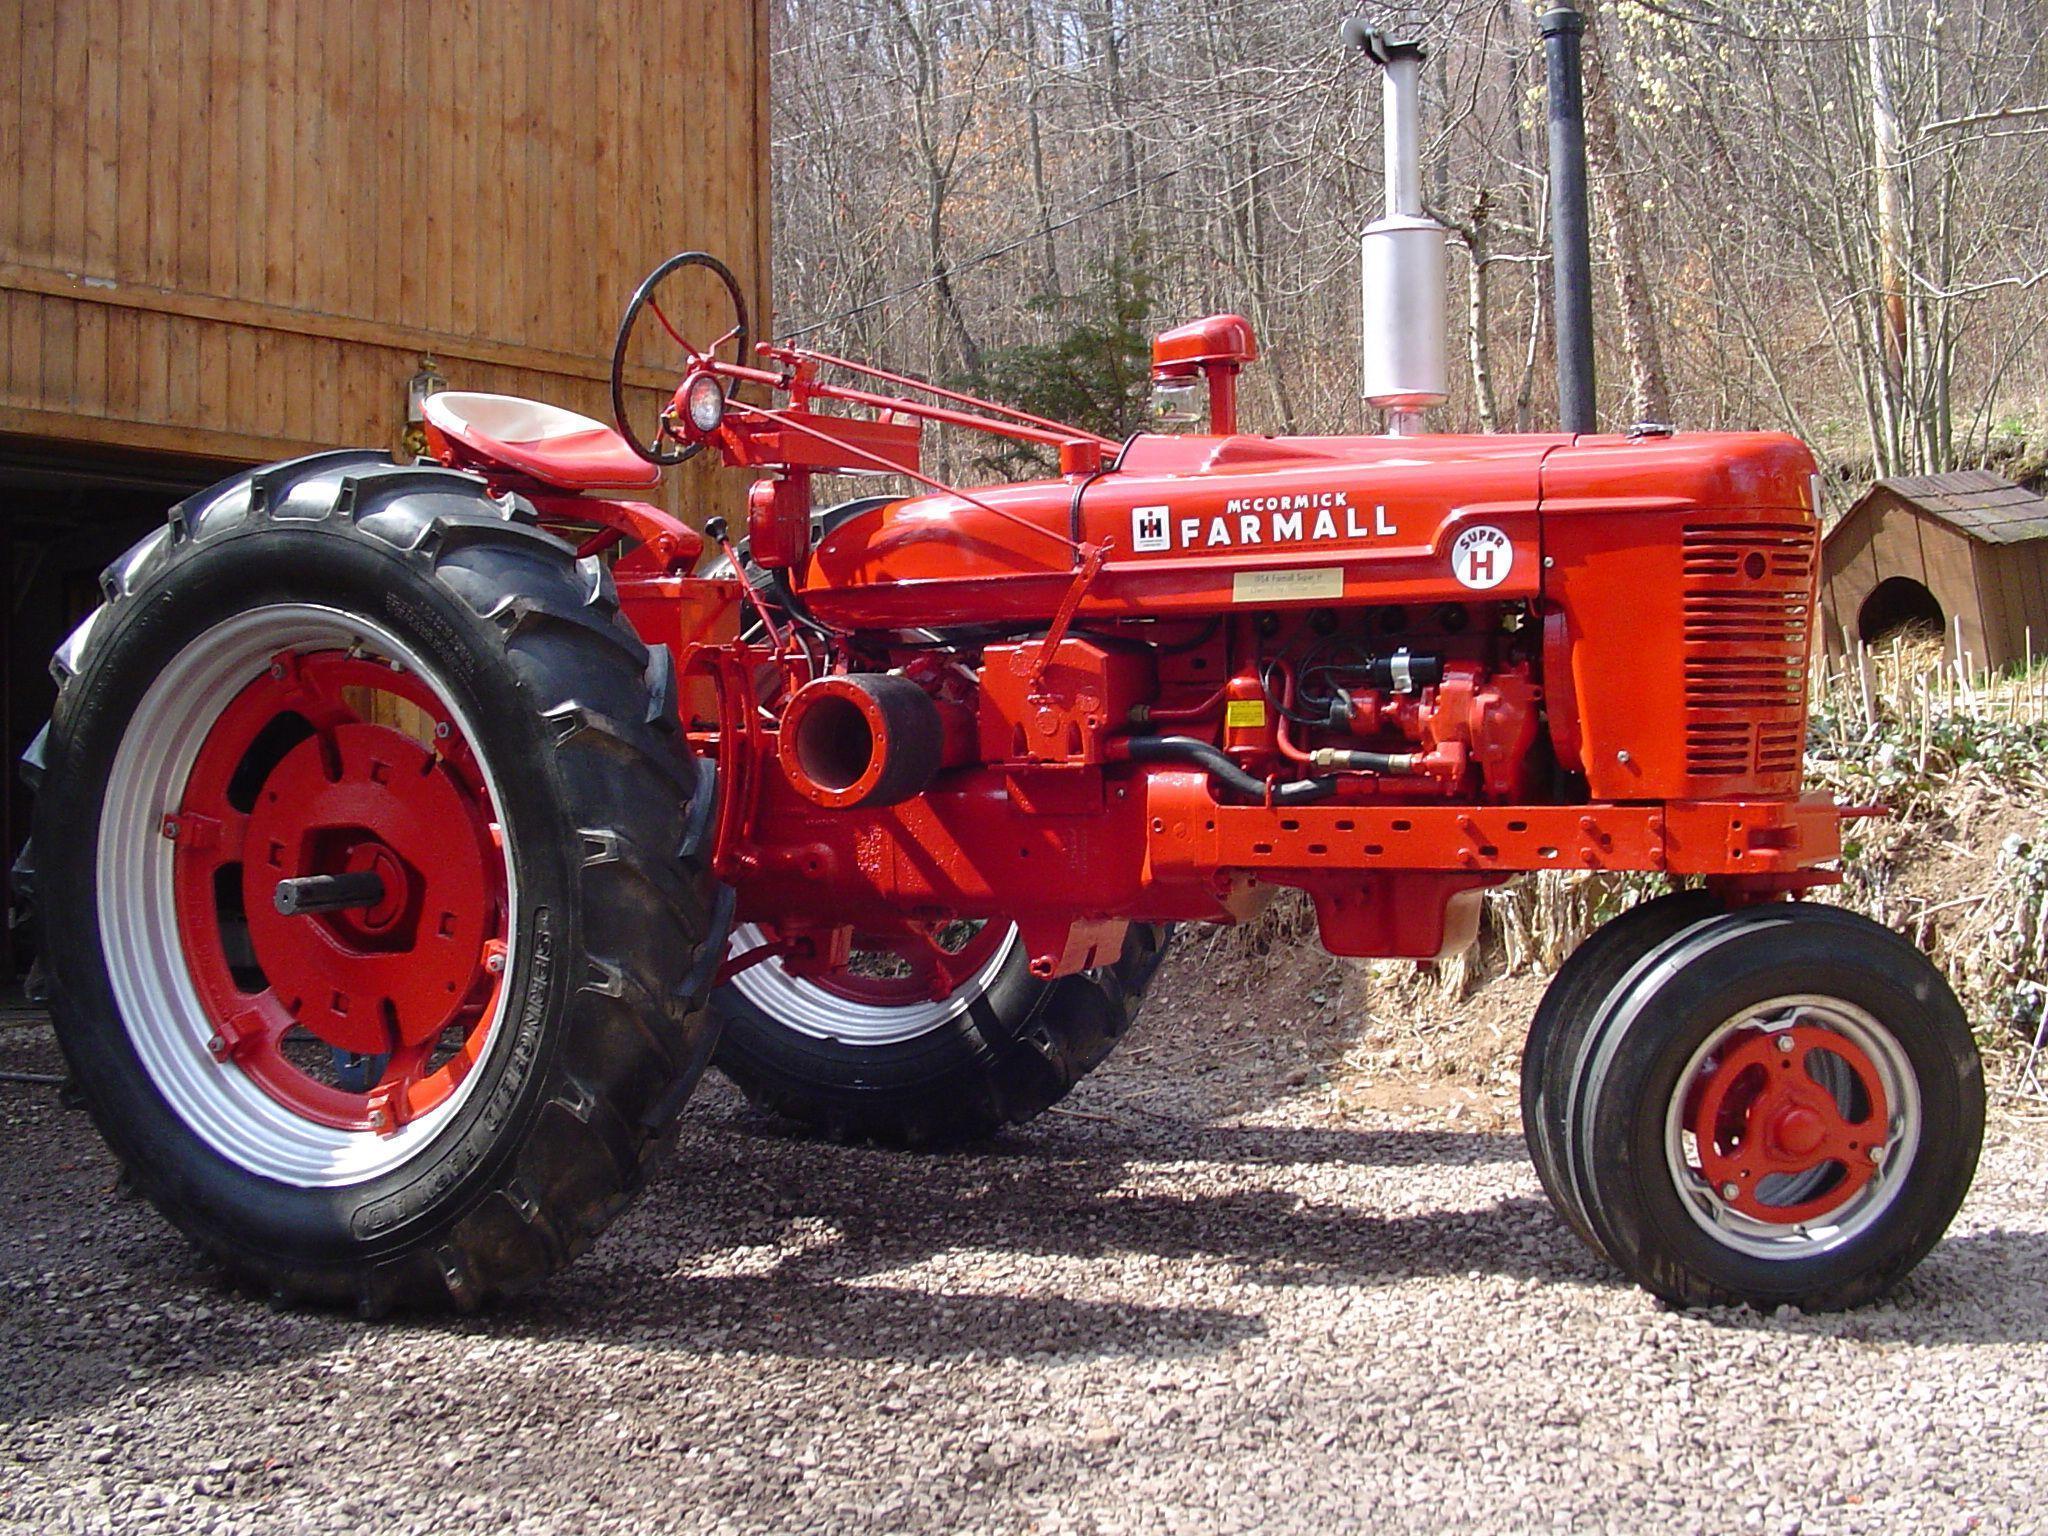 best image about I'm Liking The Farmall Tractor's!!!